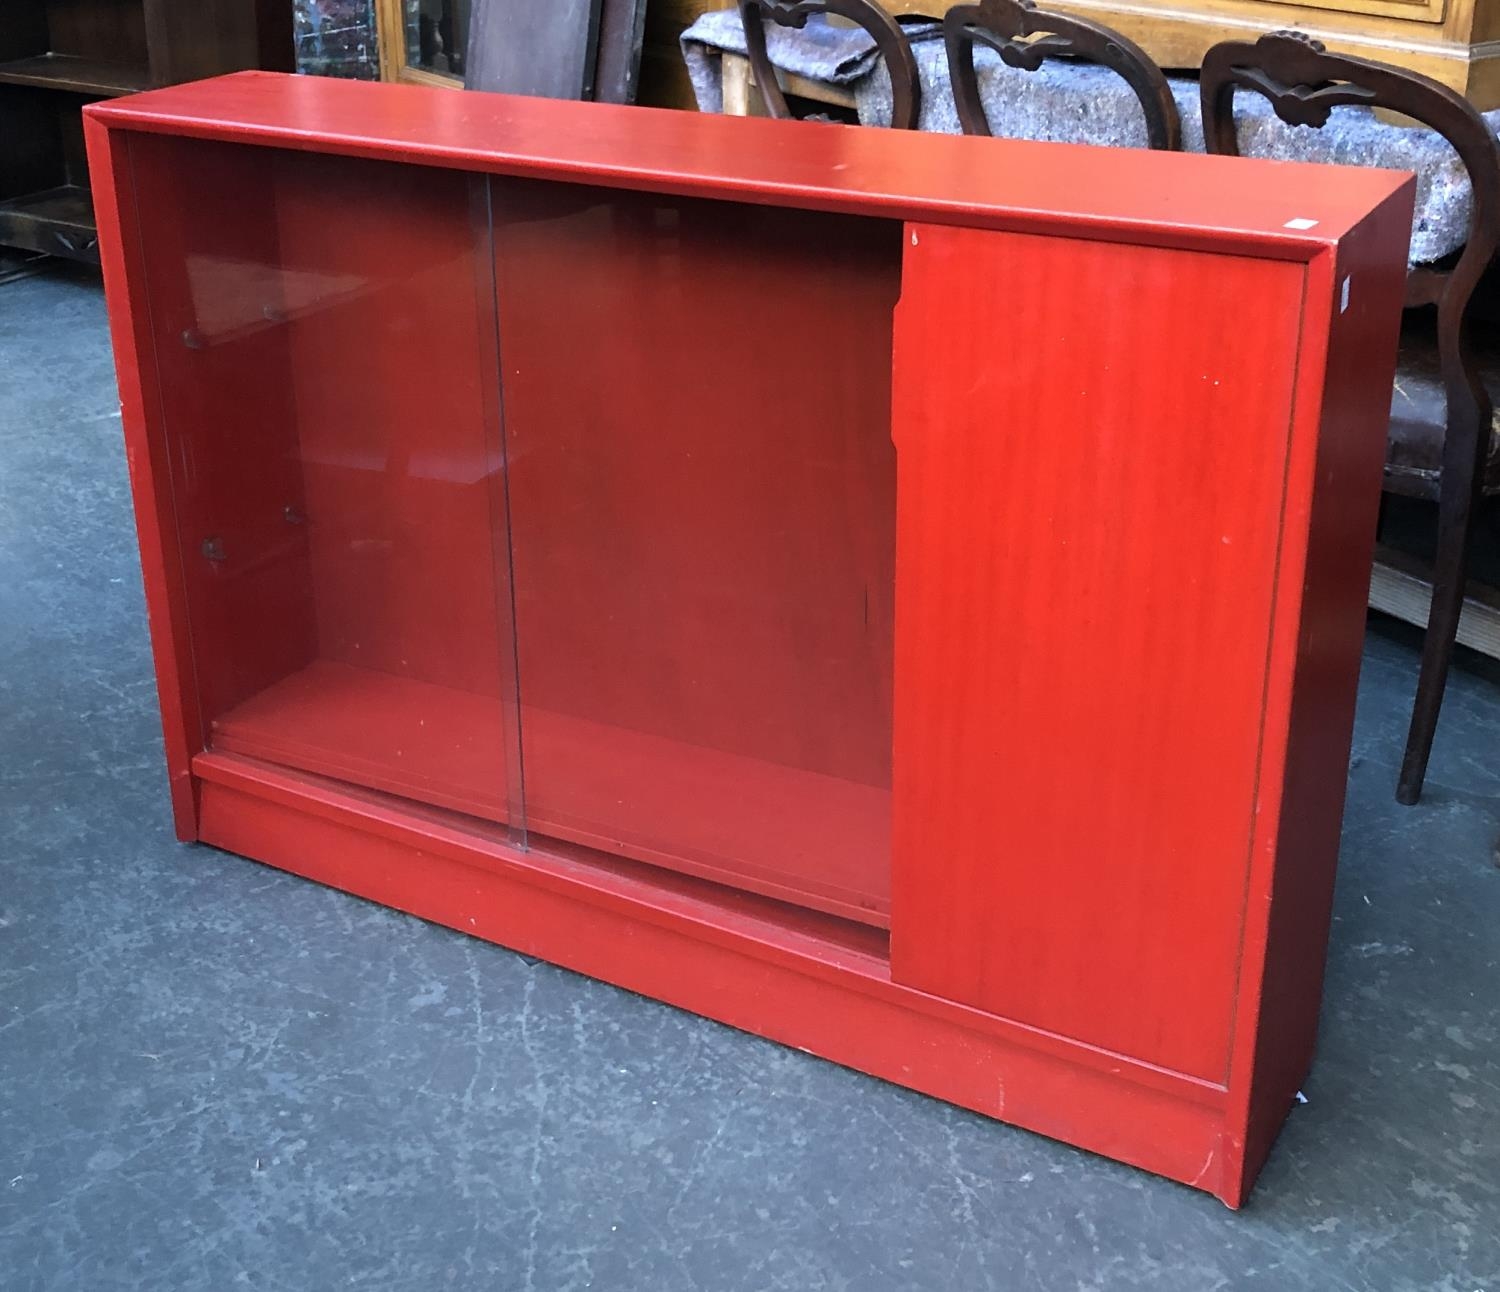 A mid century Gibbs glazed bookcase, stained red, having two sliding doors, 122x24x84cmH